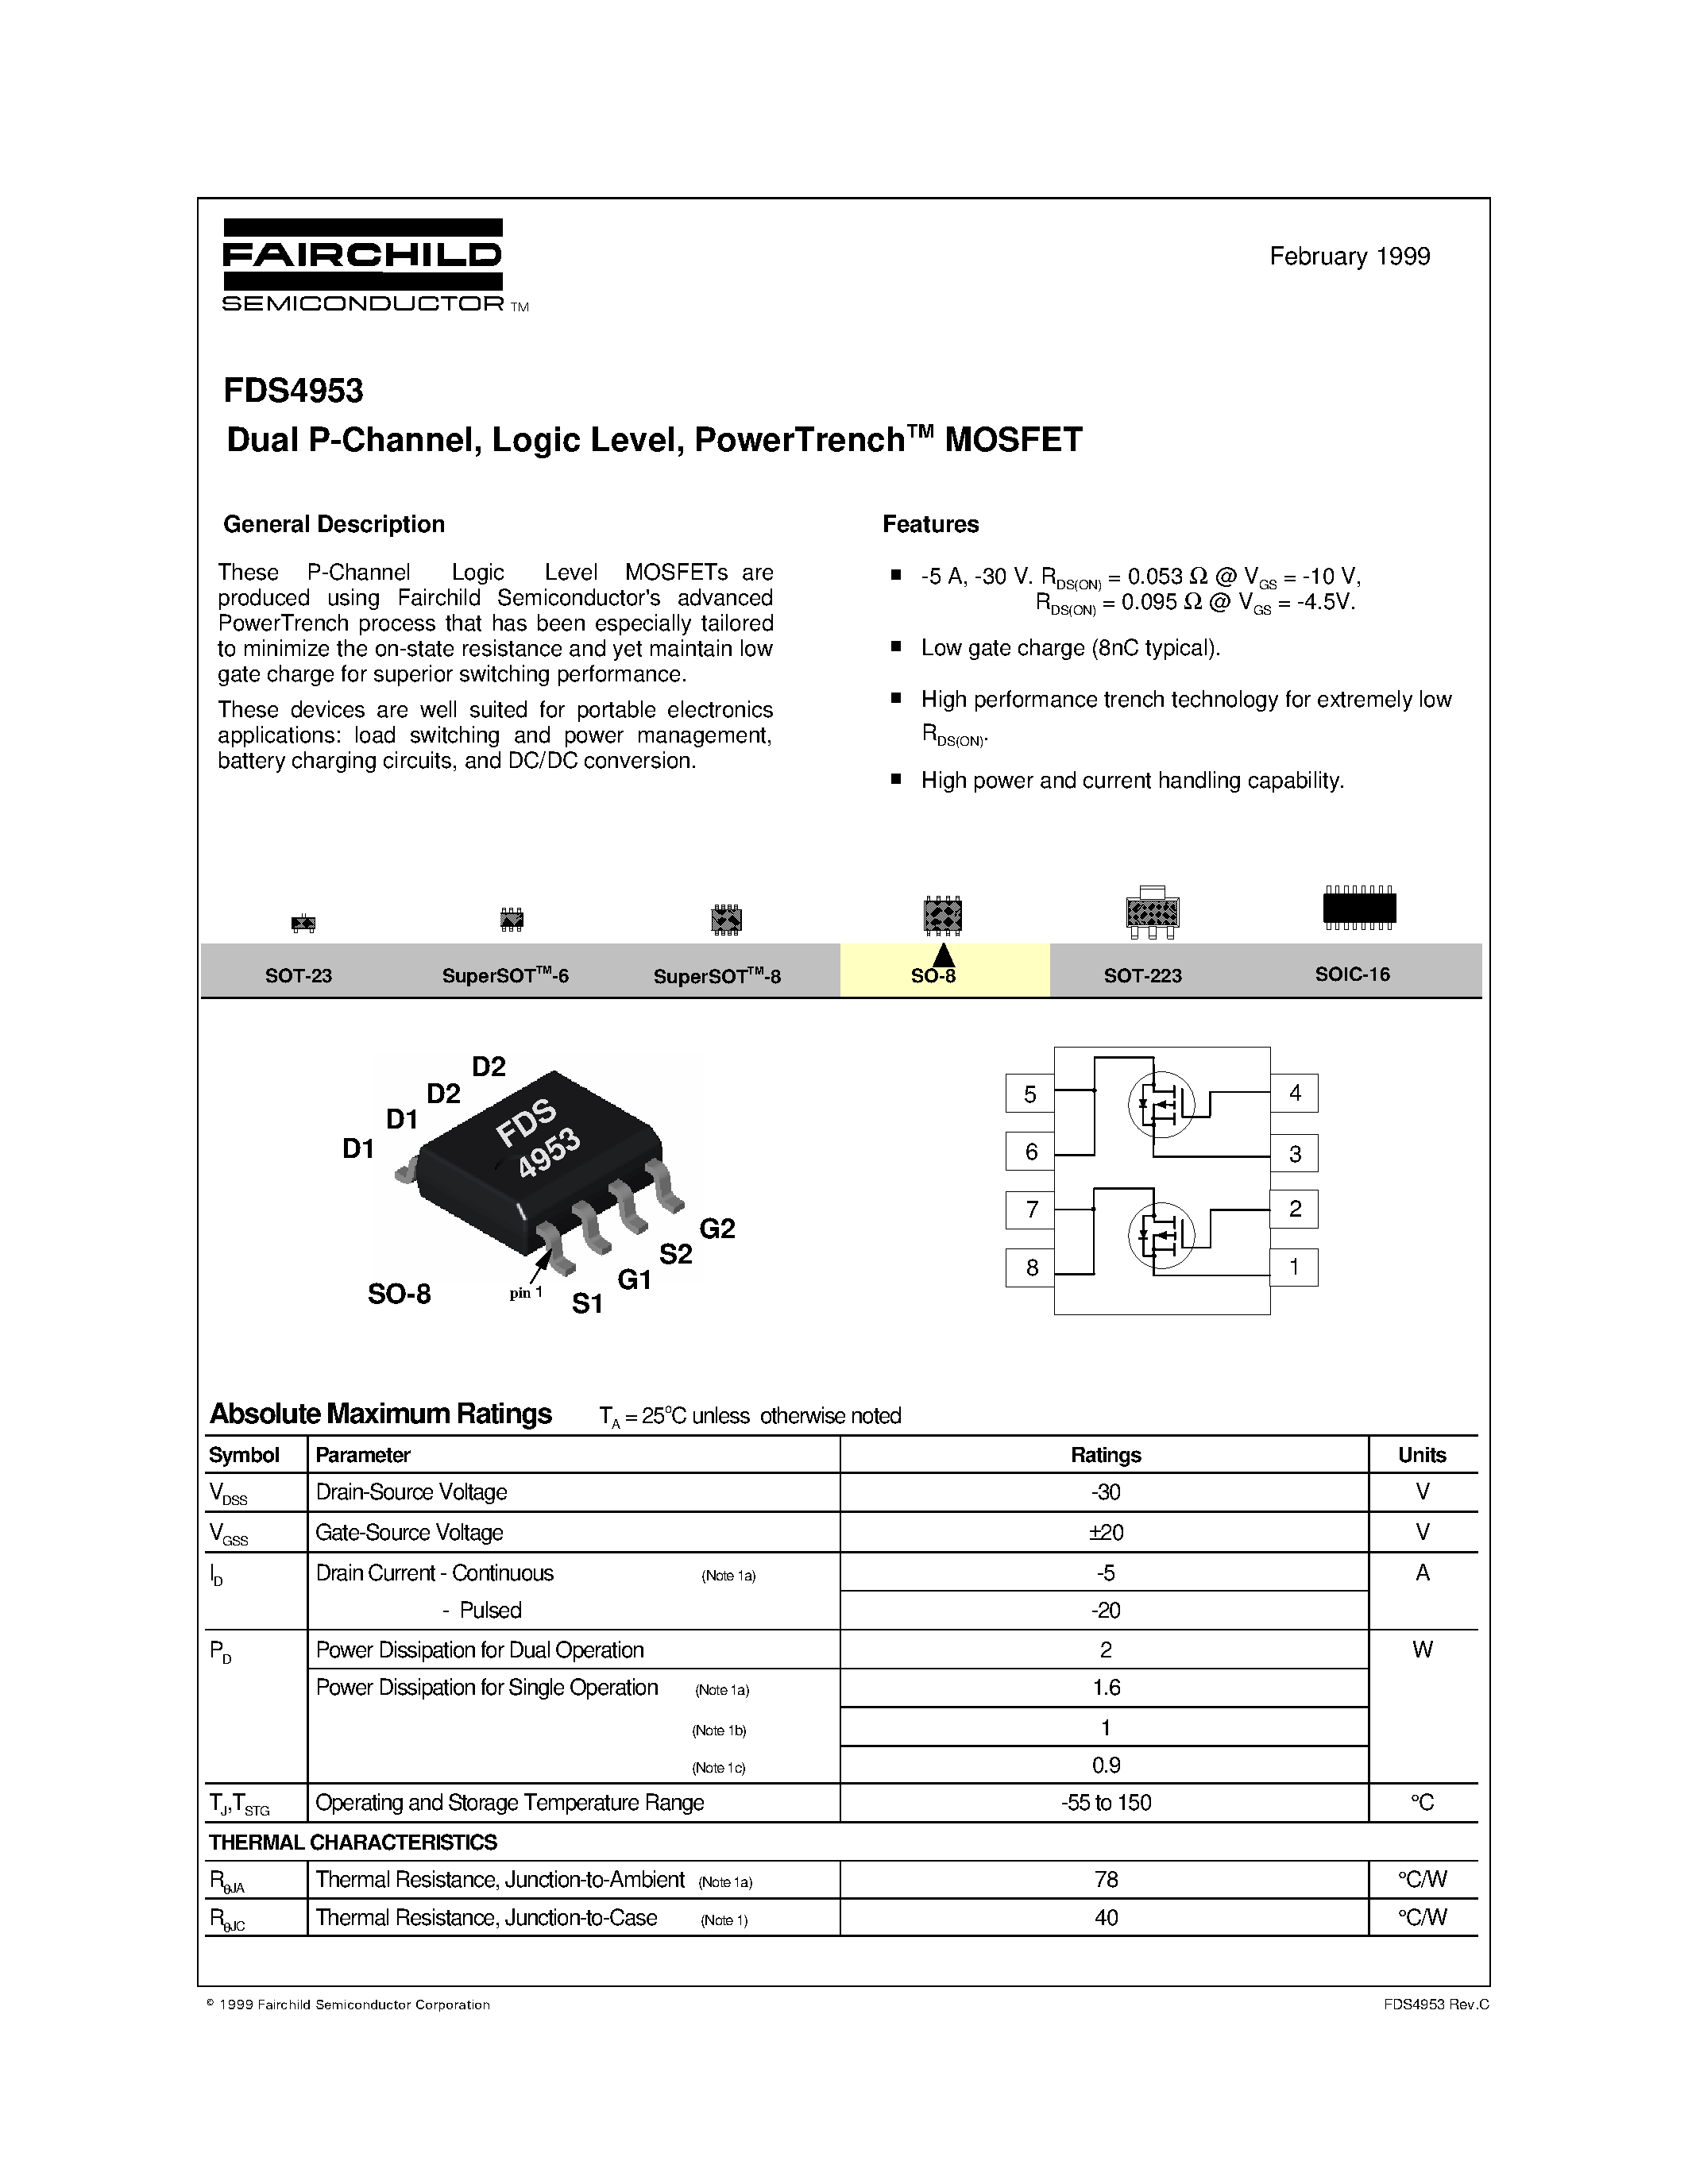 Datasheet FDS4953 - Dual P-Channel/ Logic Level/ PowerTrenchTM MOSFET page 1